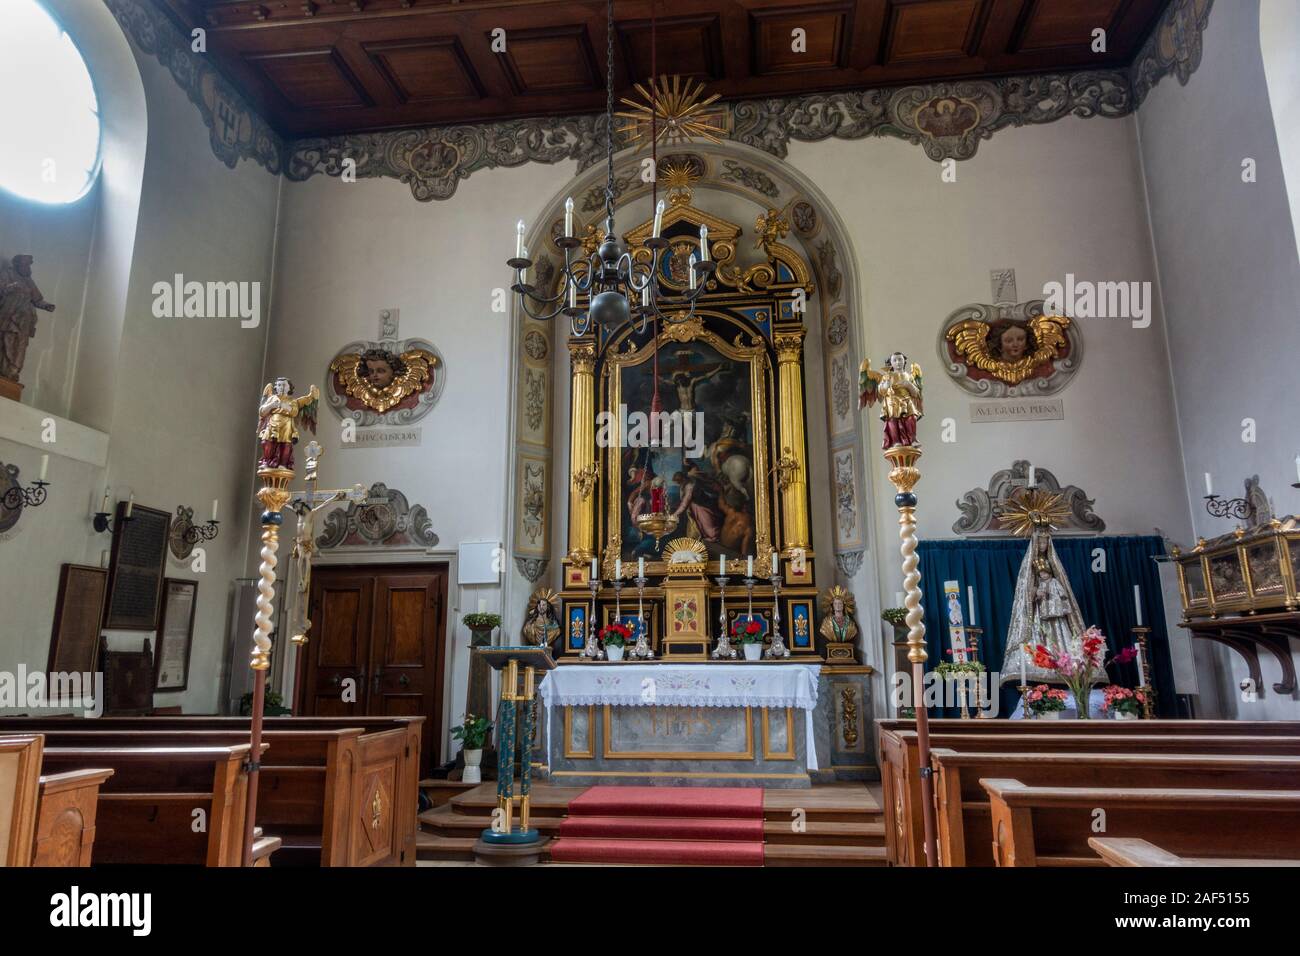 Inside the chapel inside the Fuggerei, a walled enclave within the city of Augsburg, Bavaria, Germany. Stock Photo